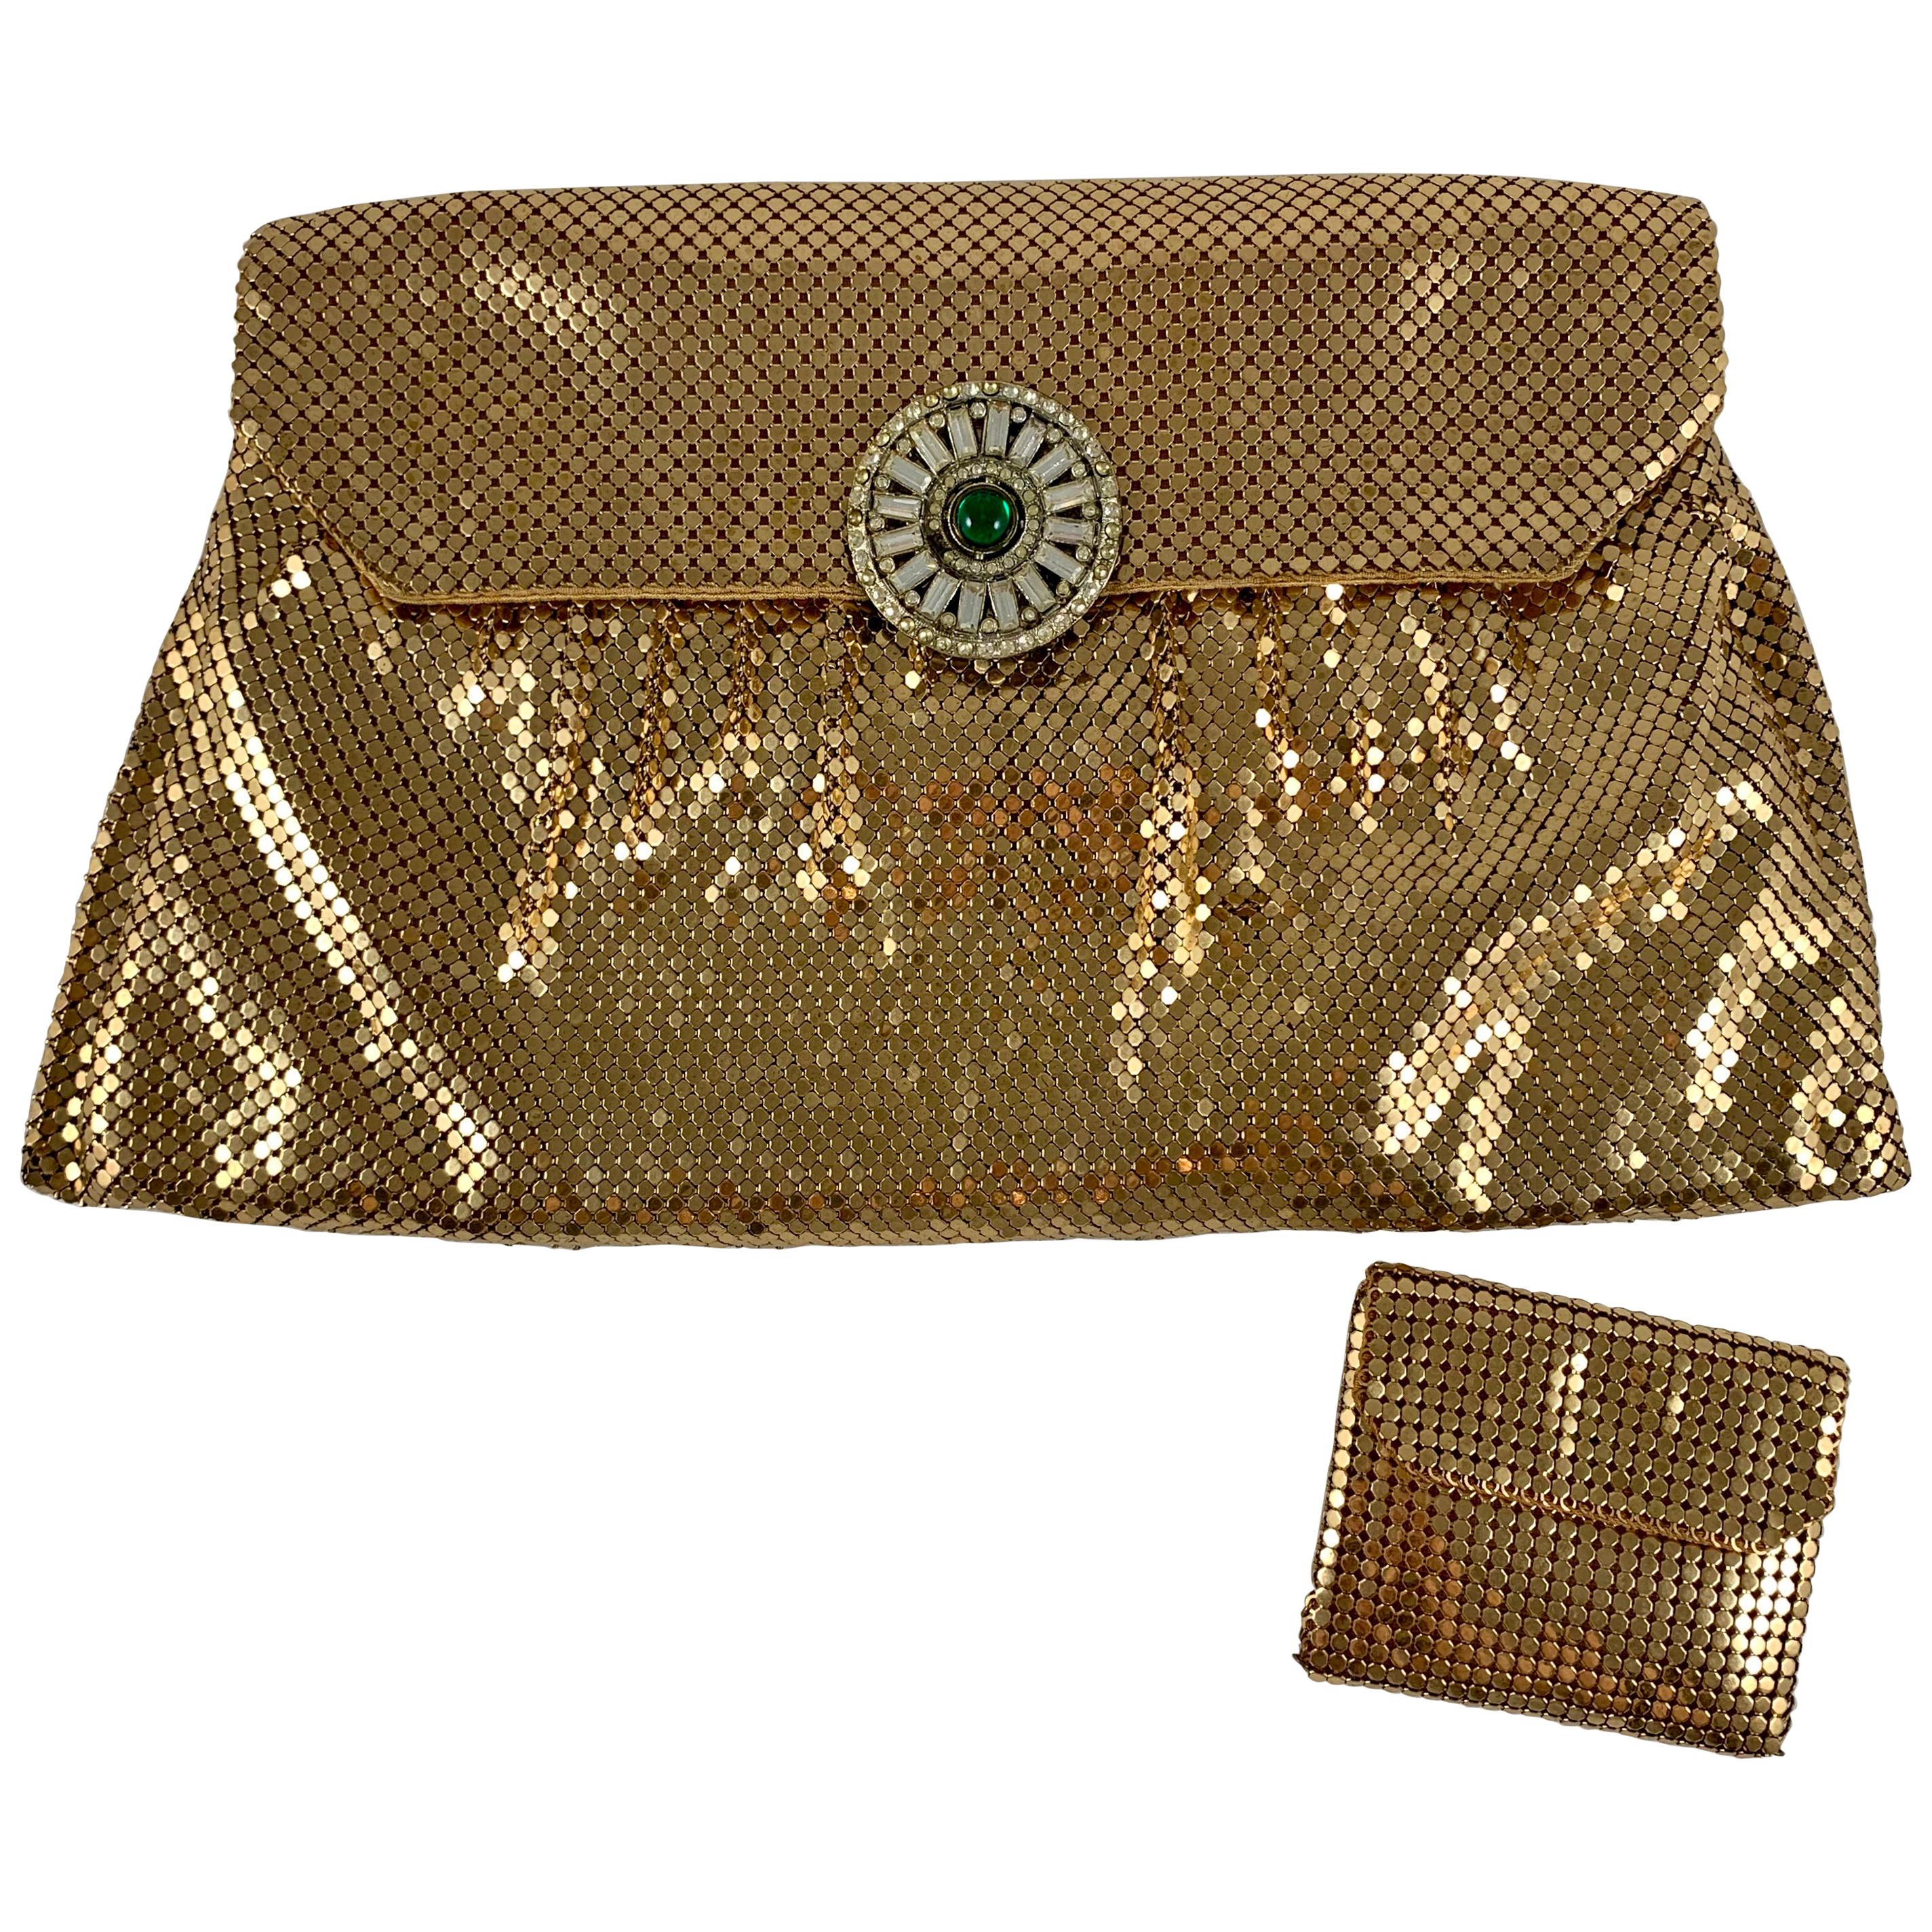 1950s Whiting and Davis Gold Mesh Jewel Closure Evening Clutch with Coin Purse